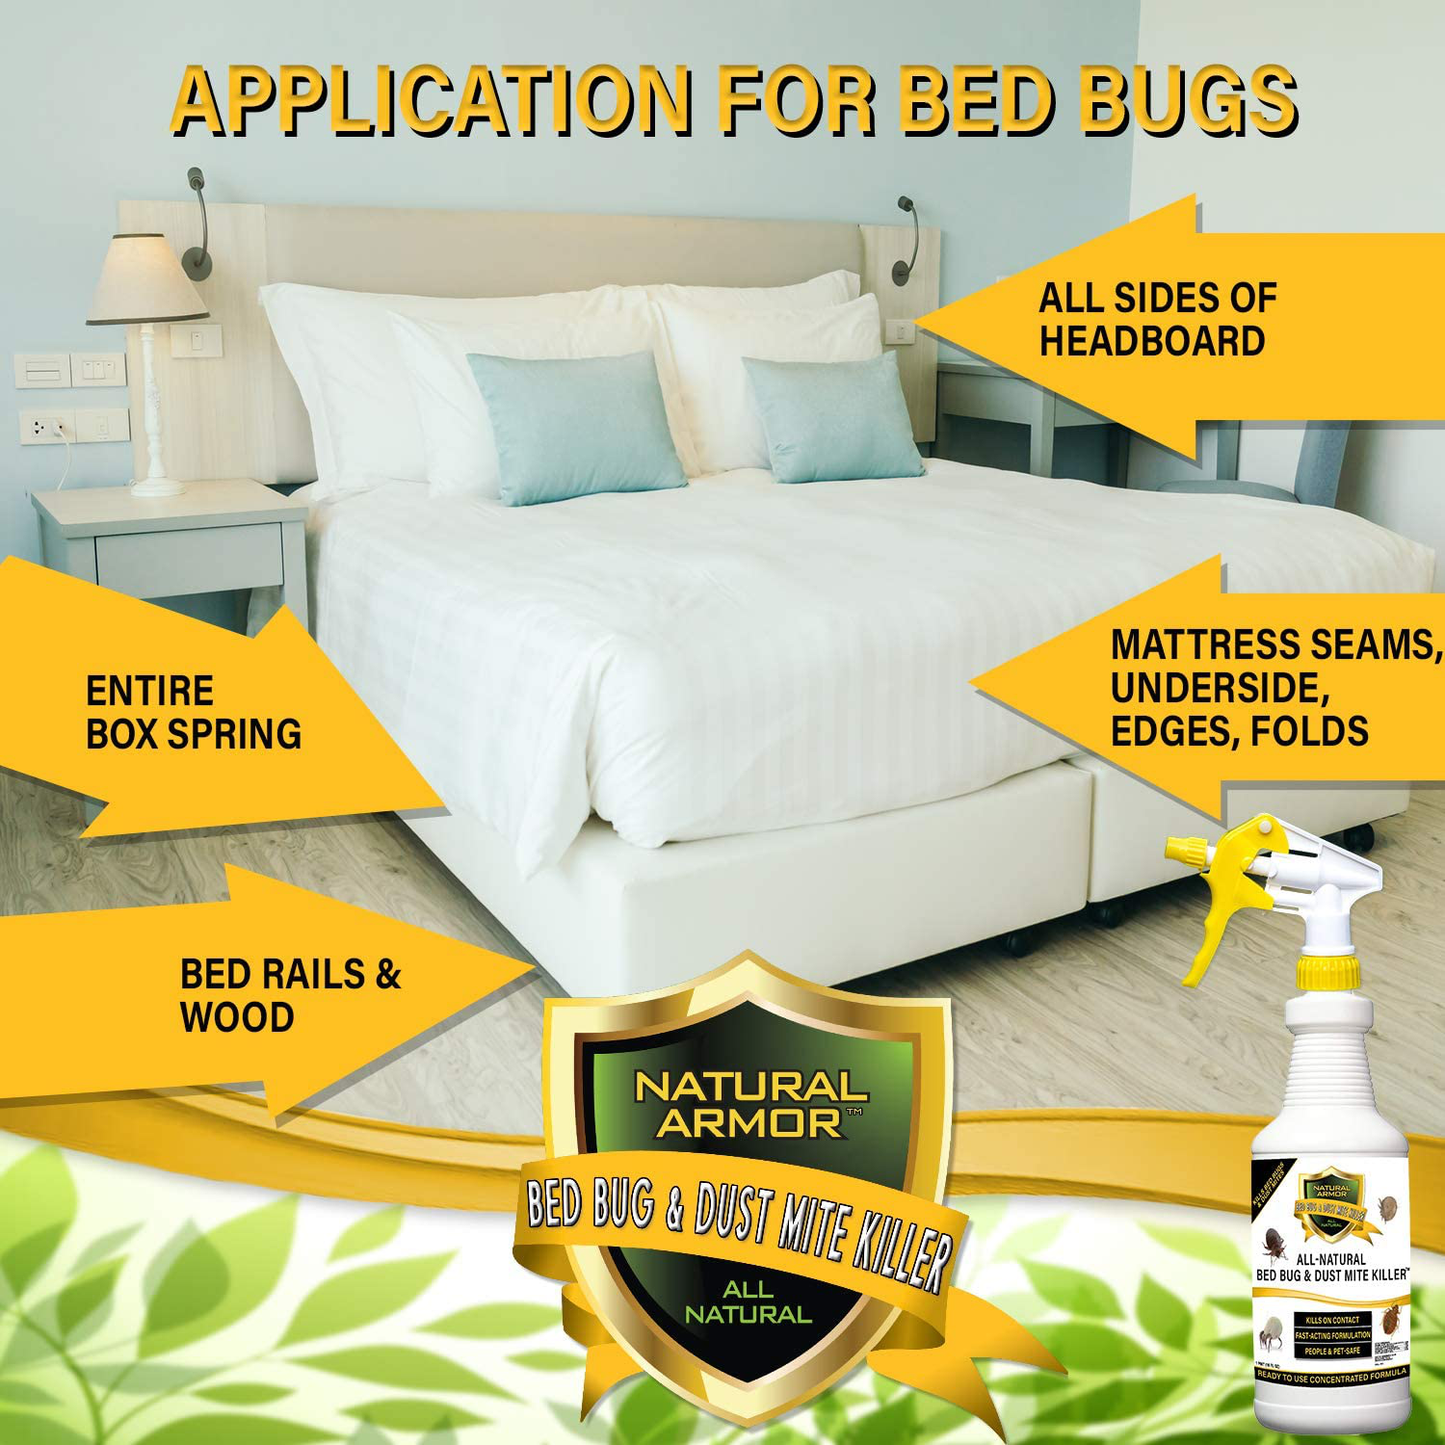 Bed Bug & Dust Mite Killer Natural Spray Treatment for Mattresses, Covers, Carpets & Furniture - Fast Extended Protection. Pet & Kids Safe - No Toxins or Chemicals 32 oz Quart